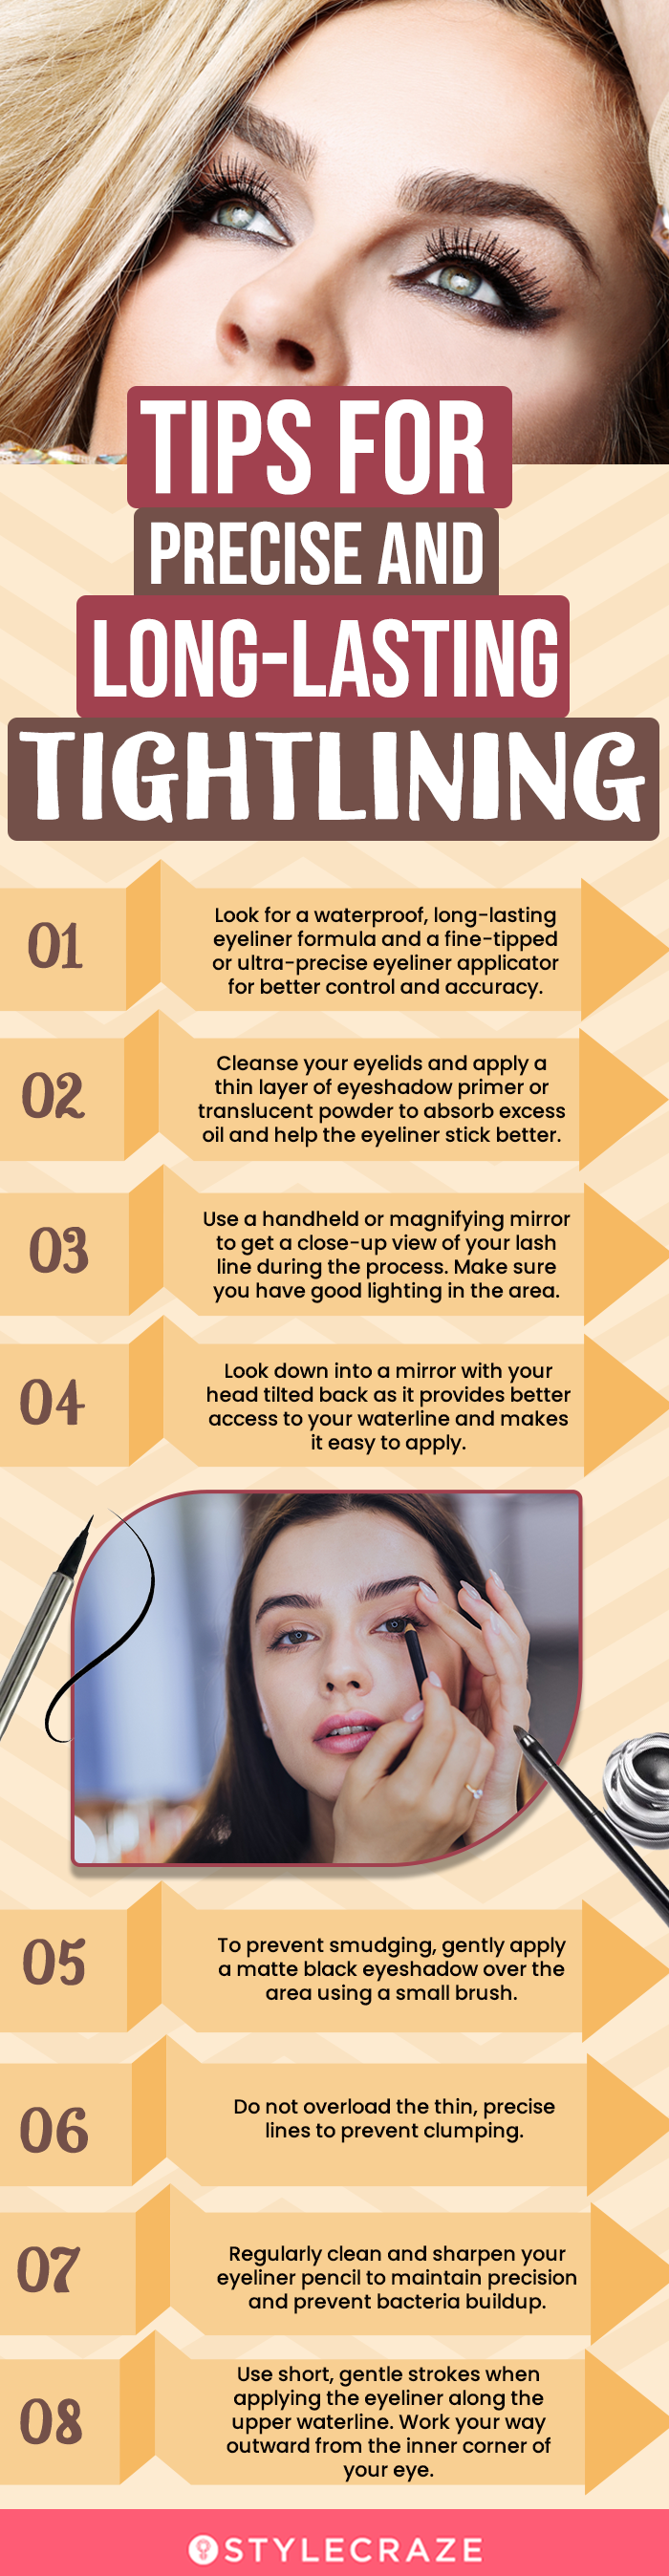 Tips For Precise And Long-Lasting Tightlining (infographic)